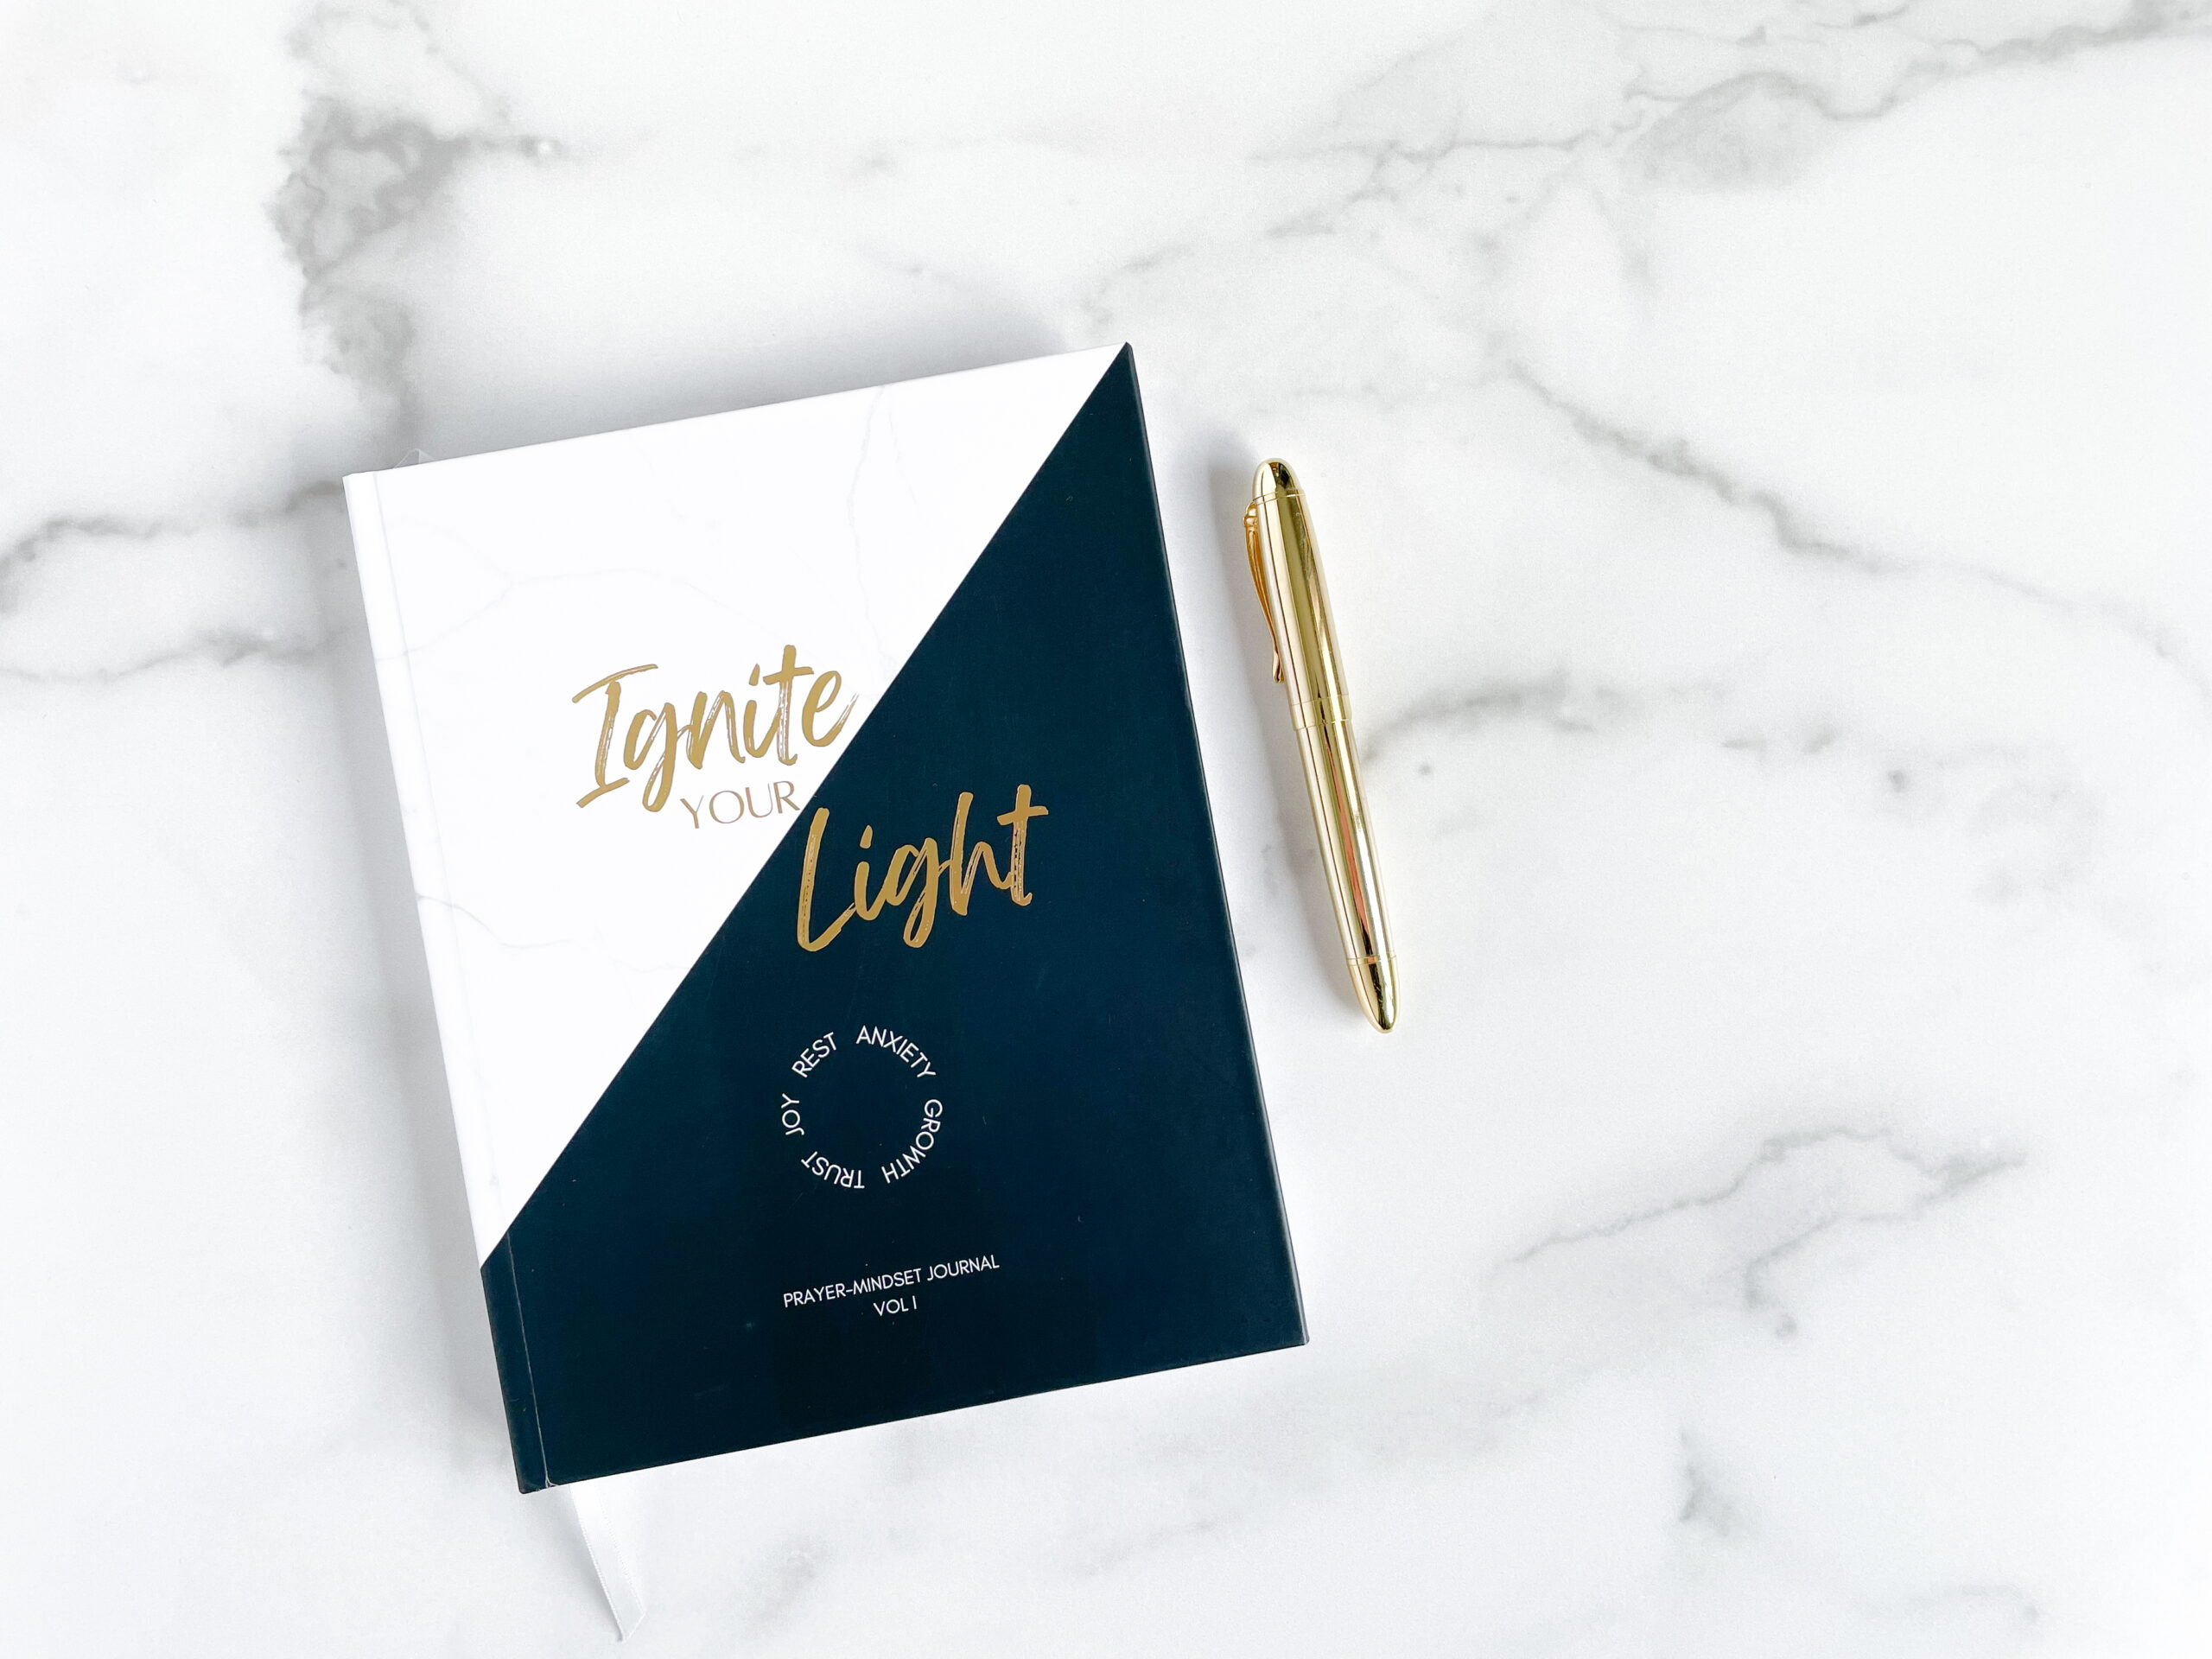 photo of a journal: Ignite Your Light with a gold pen on a white/gray marble background